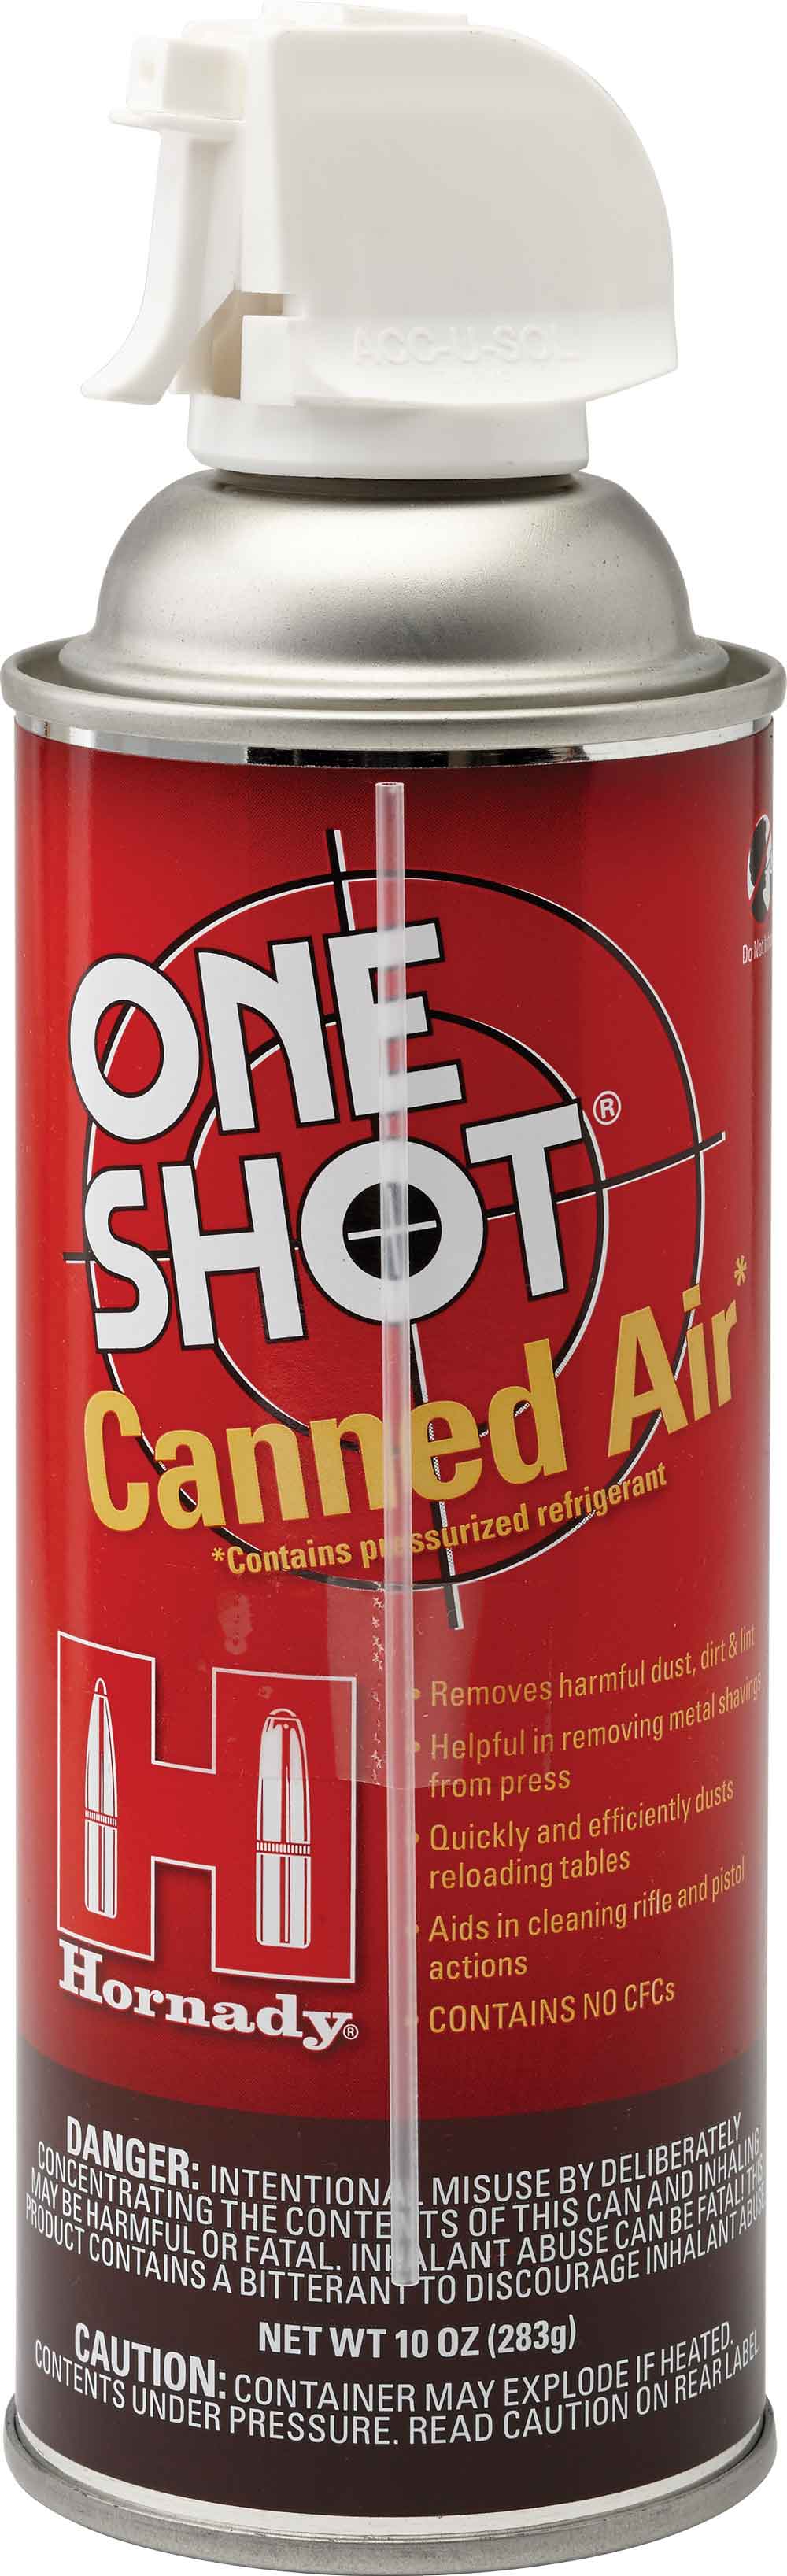 Canned-air